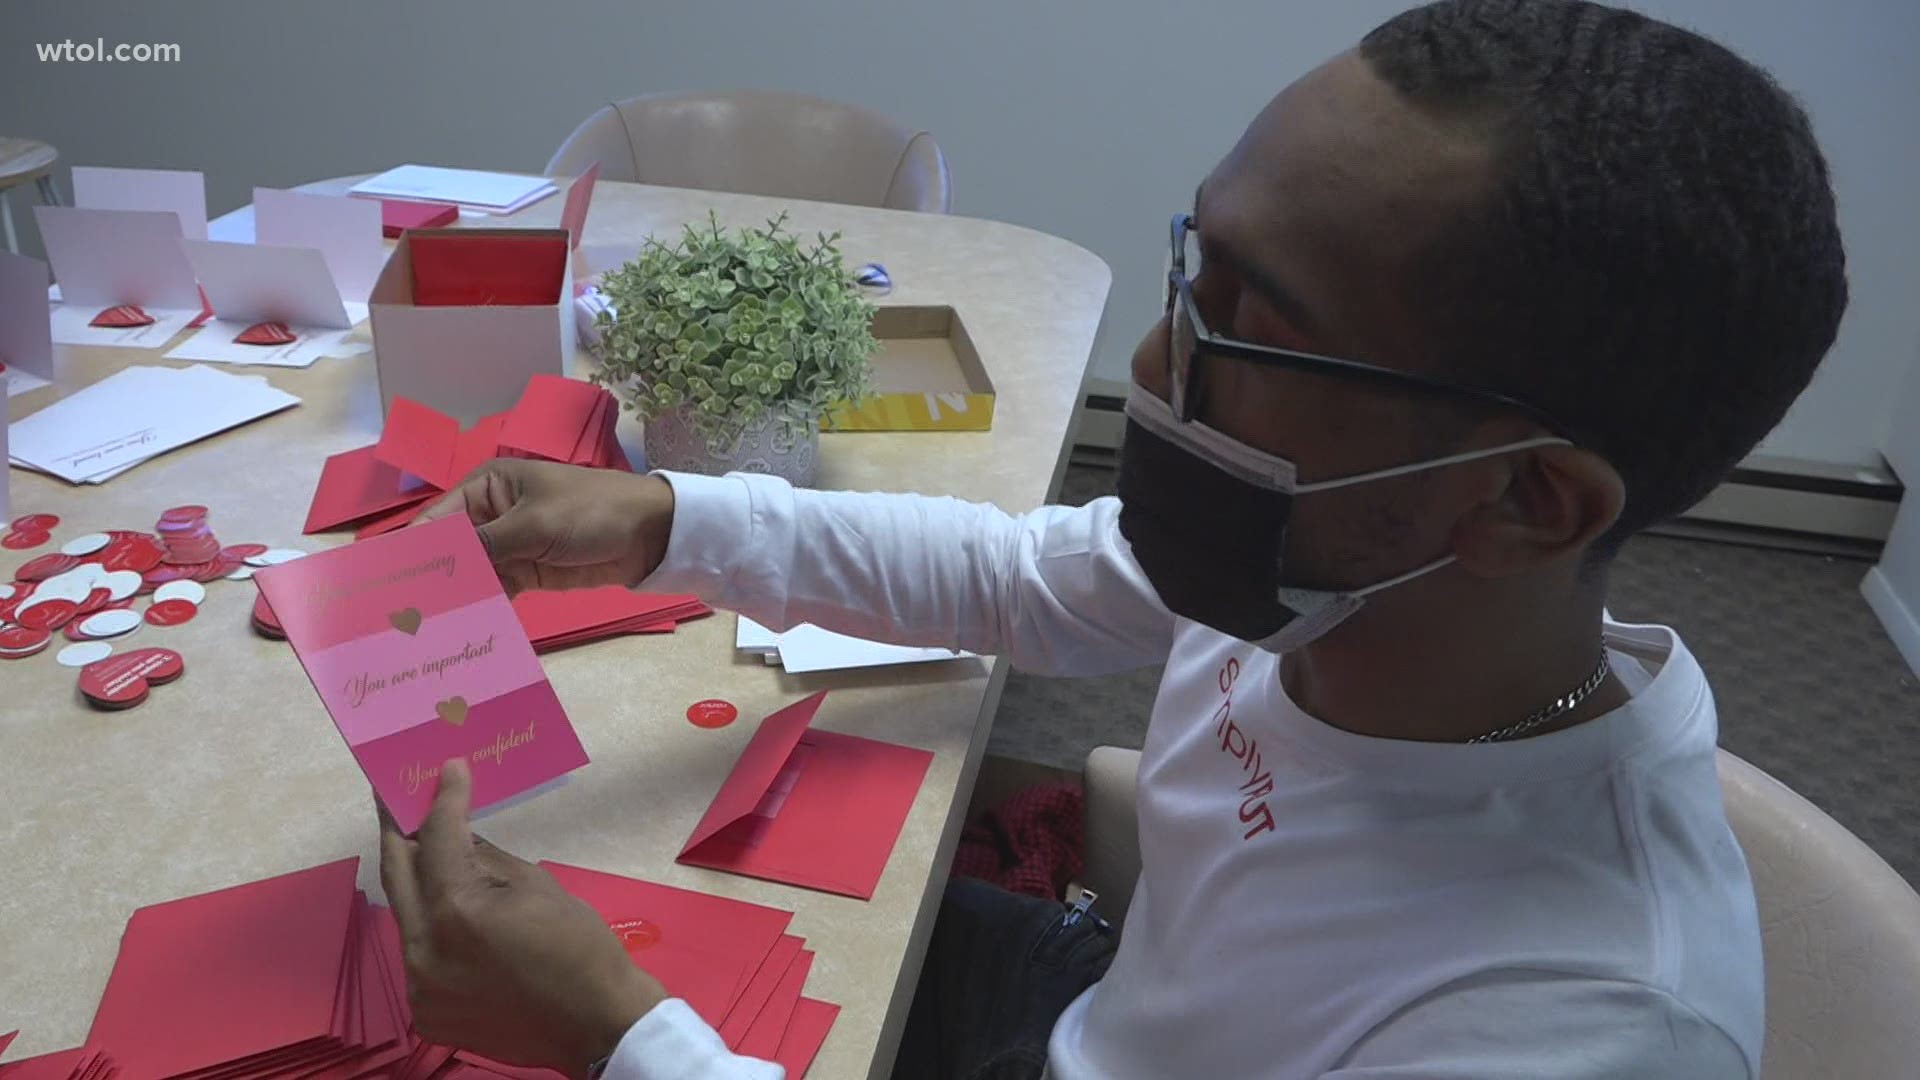 SimplyPut plans to spread love by giving away almost 1,000 Valentine's Day cards to schools and organizations.